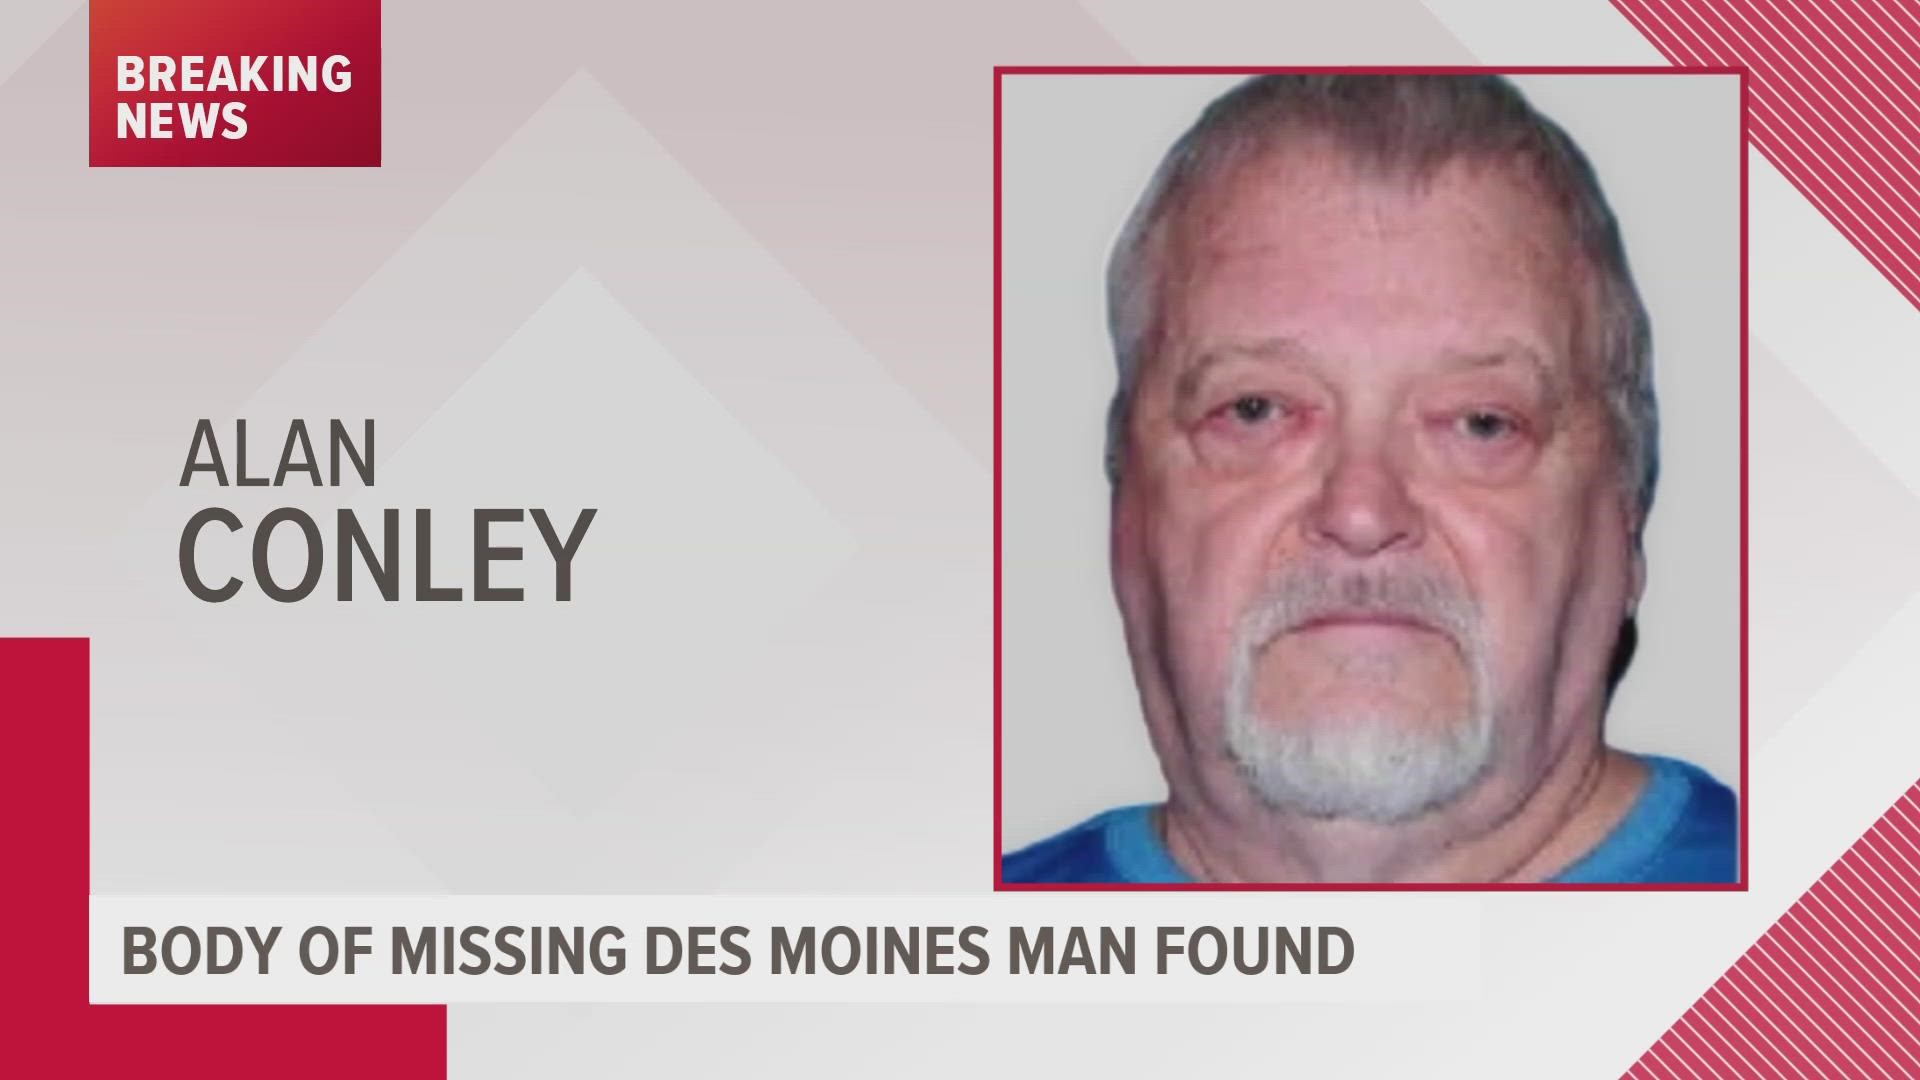 76-year-old Alan Conley left his north Des Moines home around 2 a.m. Monday, Feb. 6 and never returned.